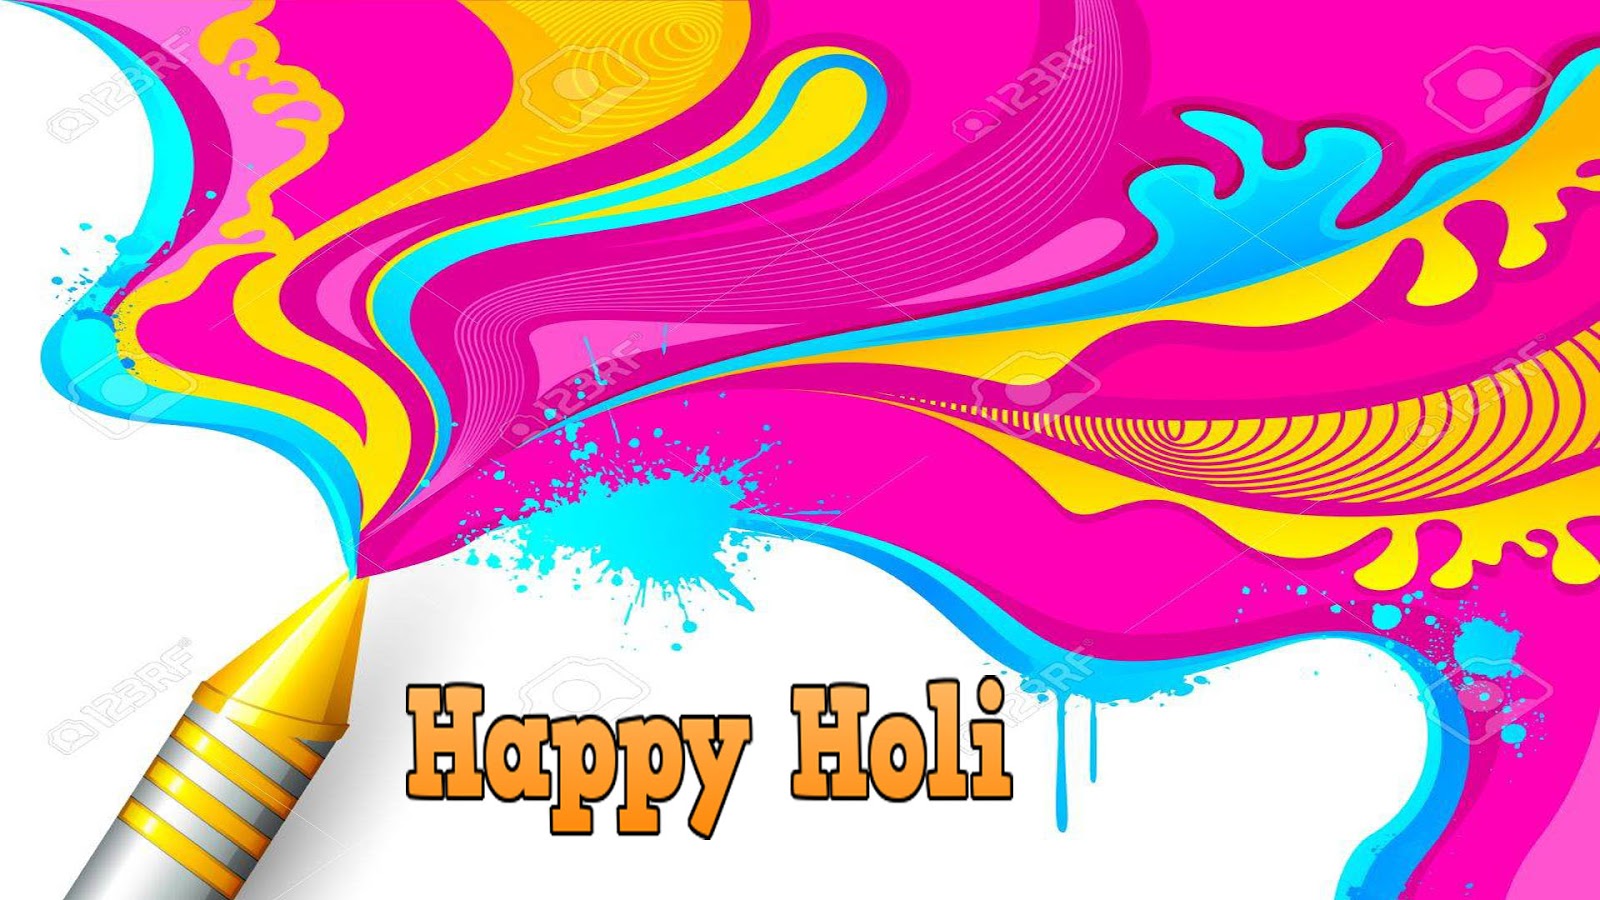 Happy Holi Images,sms,hd For Fb & Whatsapp - Graphic Design , HD Wallpaper & Backgrounds